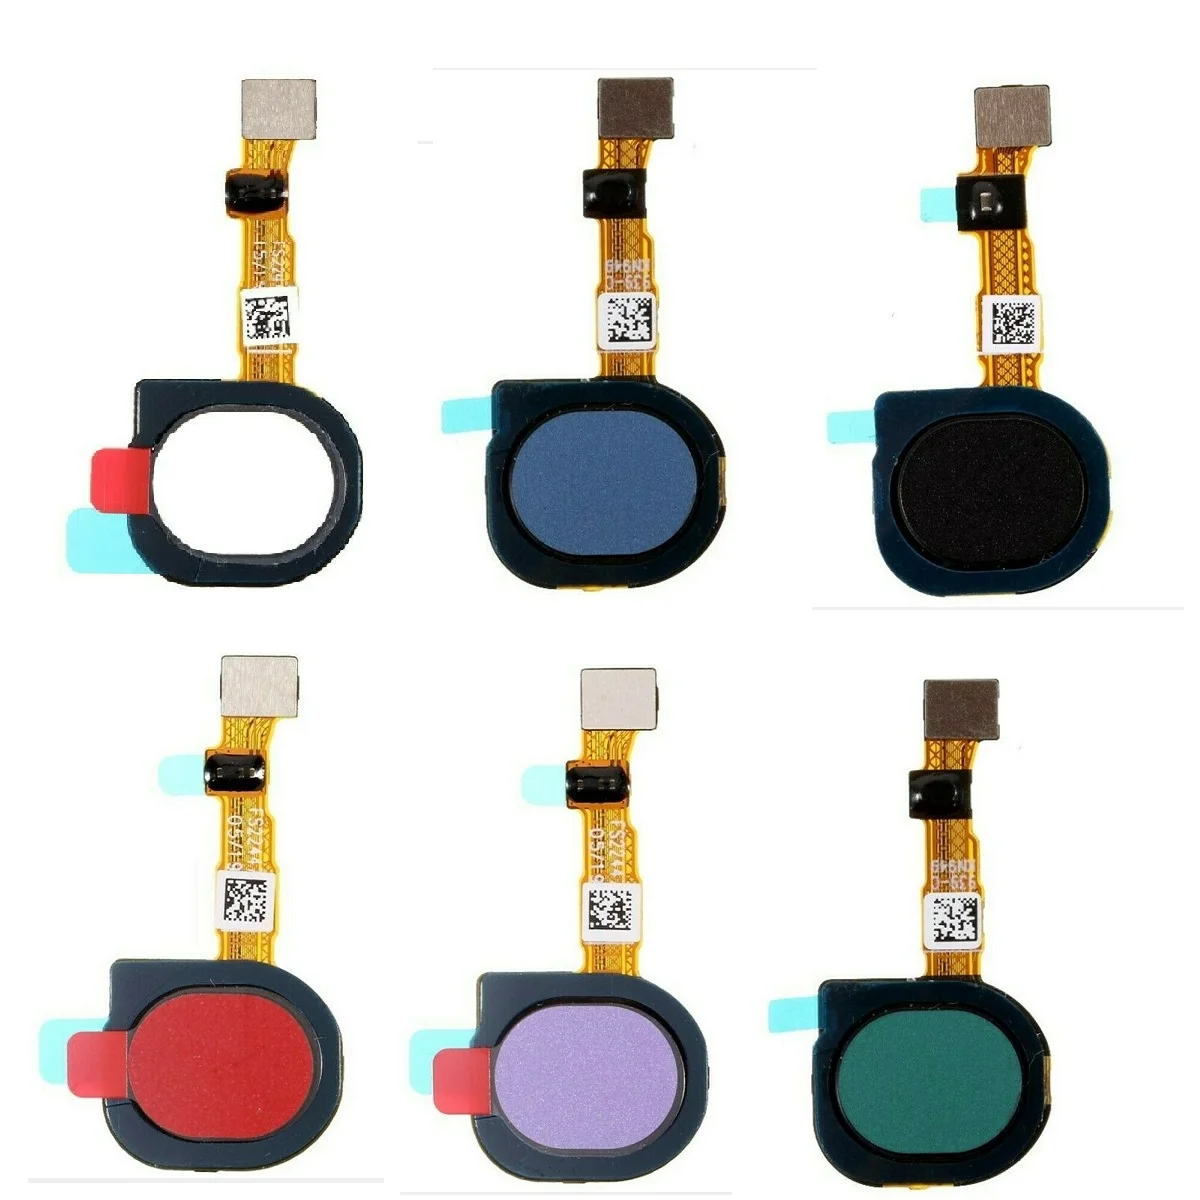 

OEM For Samsung Galaxy A11 A115 M11 Home Key Fingerprint Button Flex Cable Part Replacement Green White Black Blue Purple Red